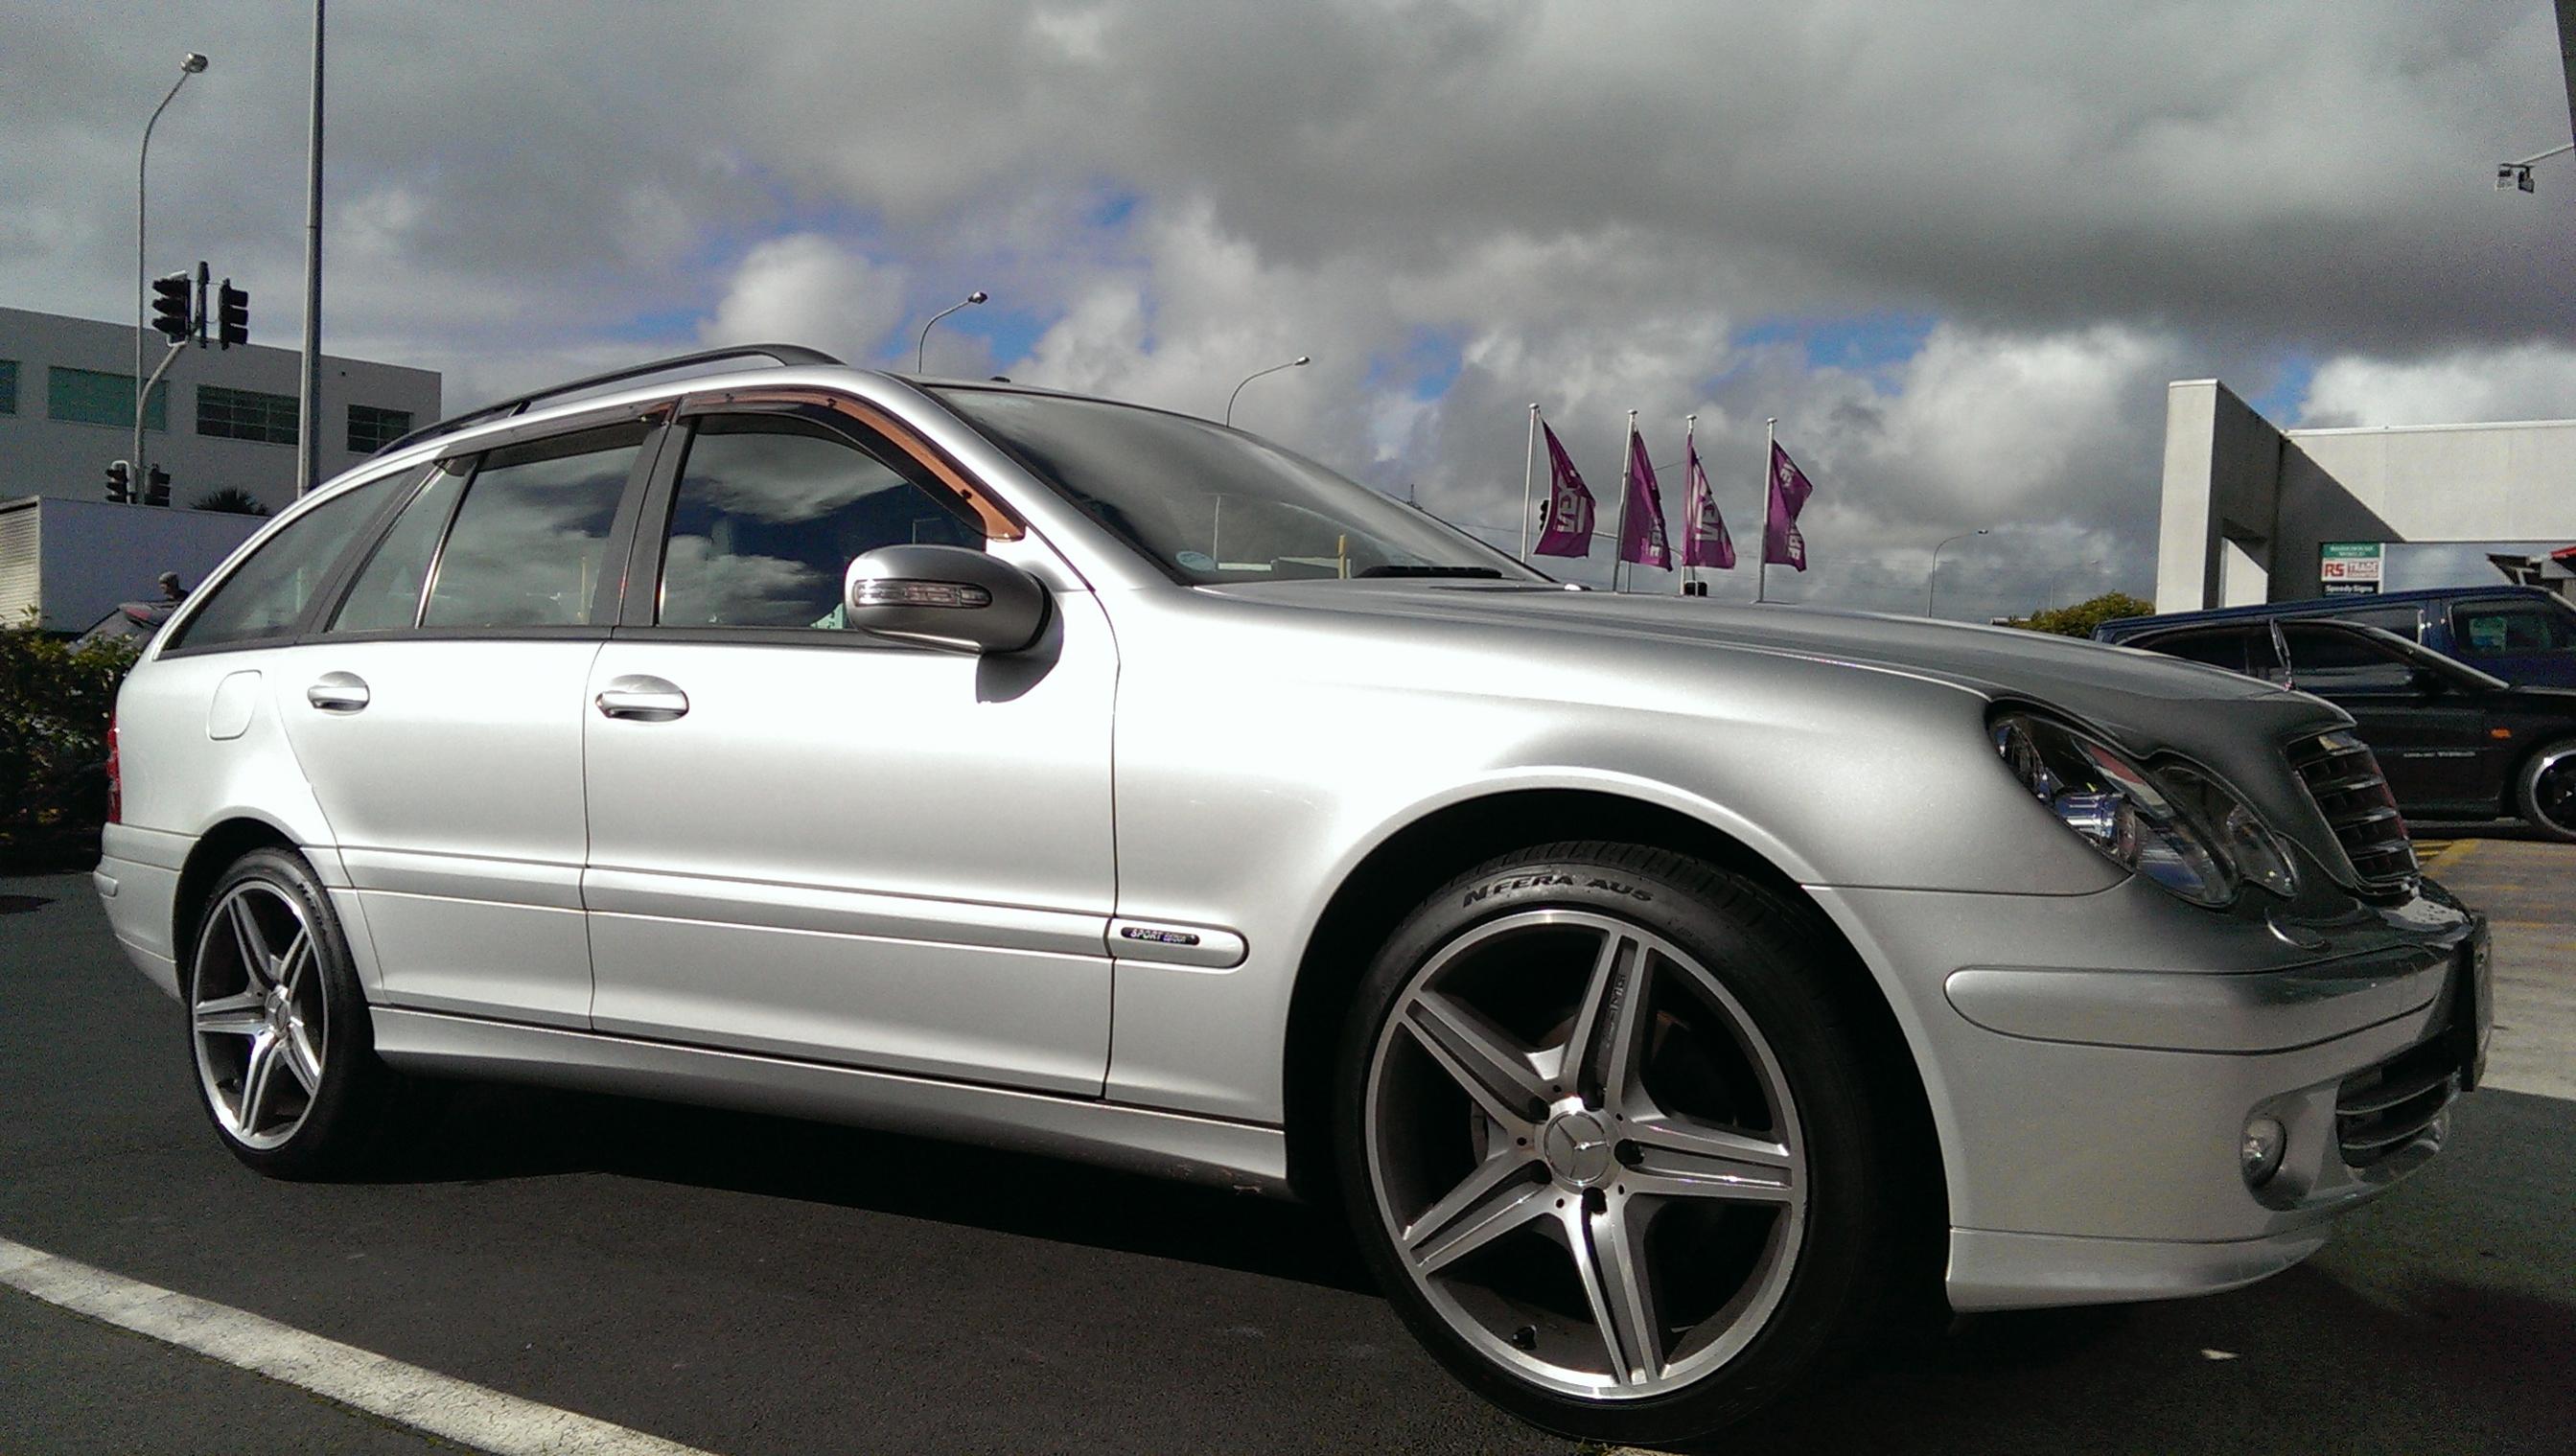 Mercedes - C-Class Type W203 Limousine Wheels and Tyre Packages